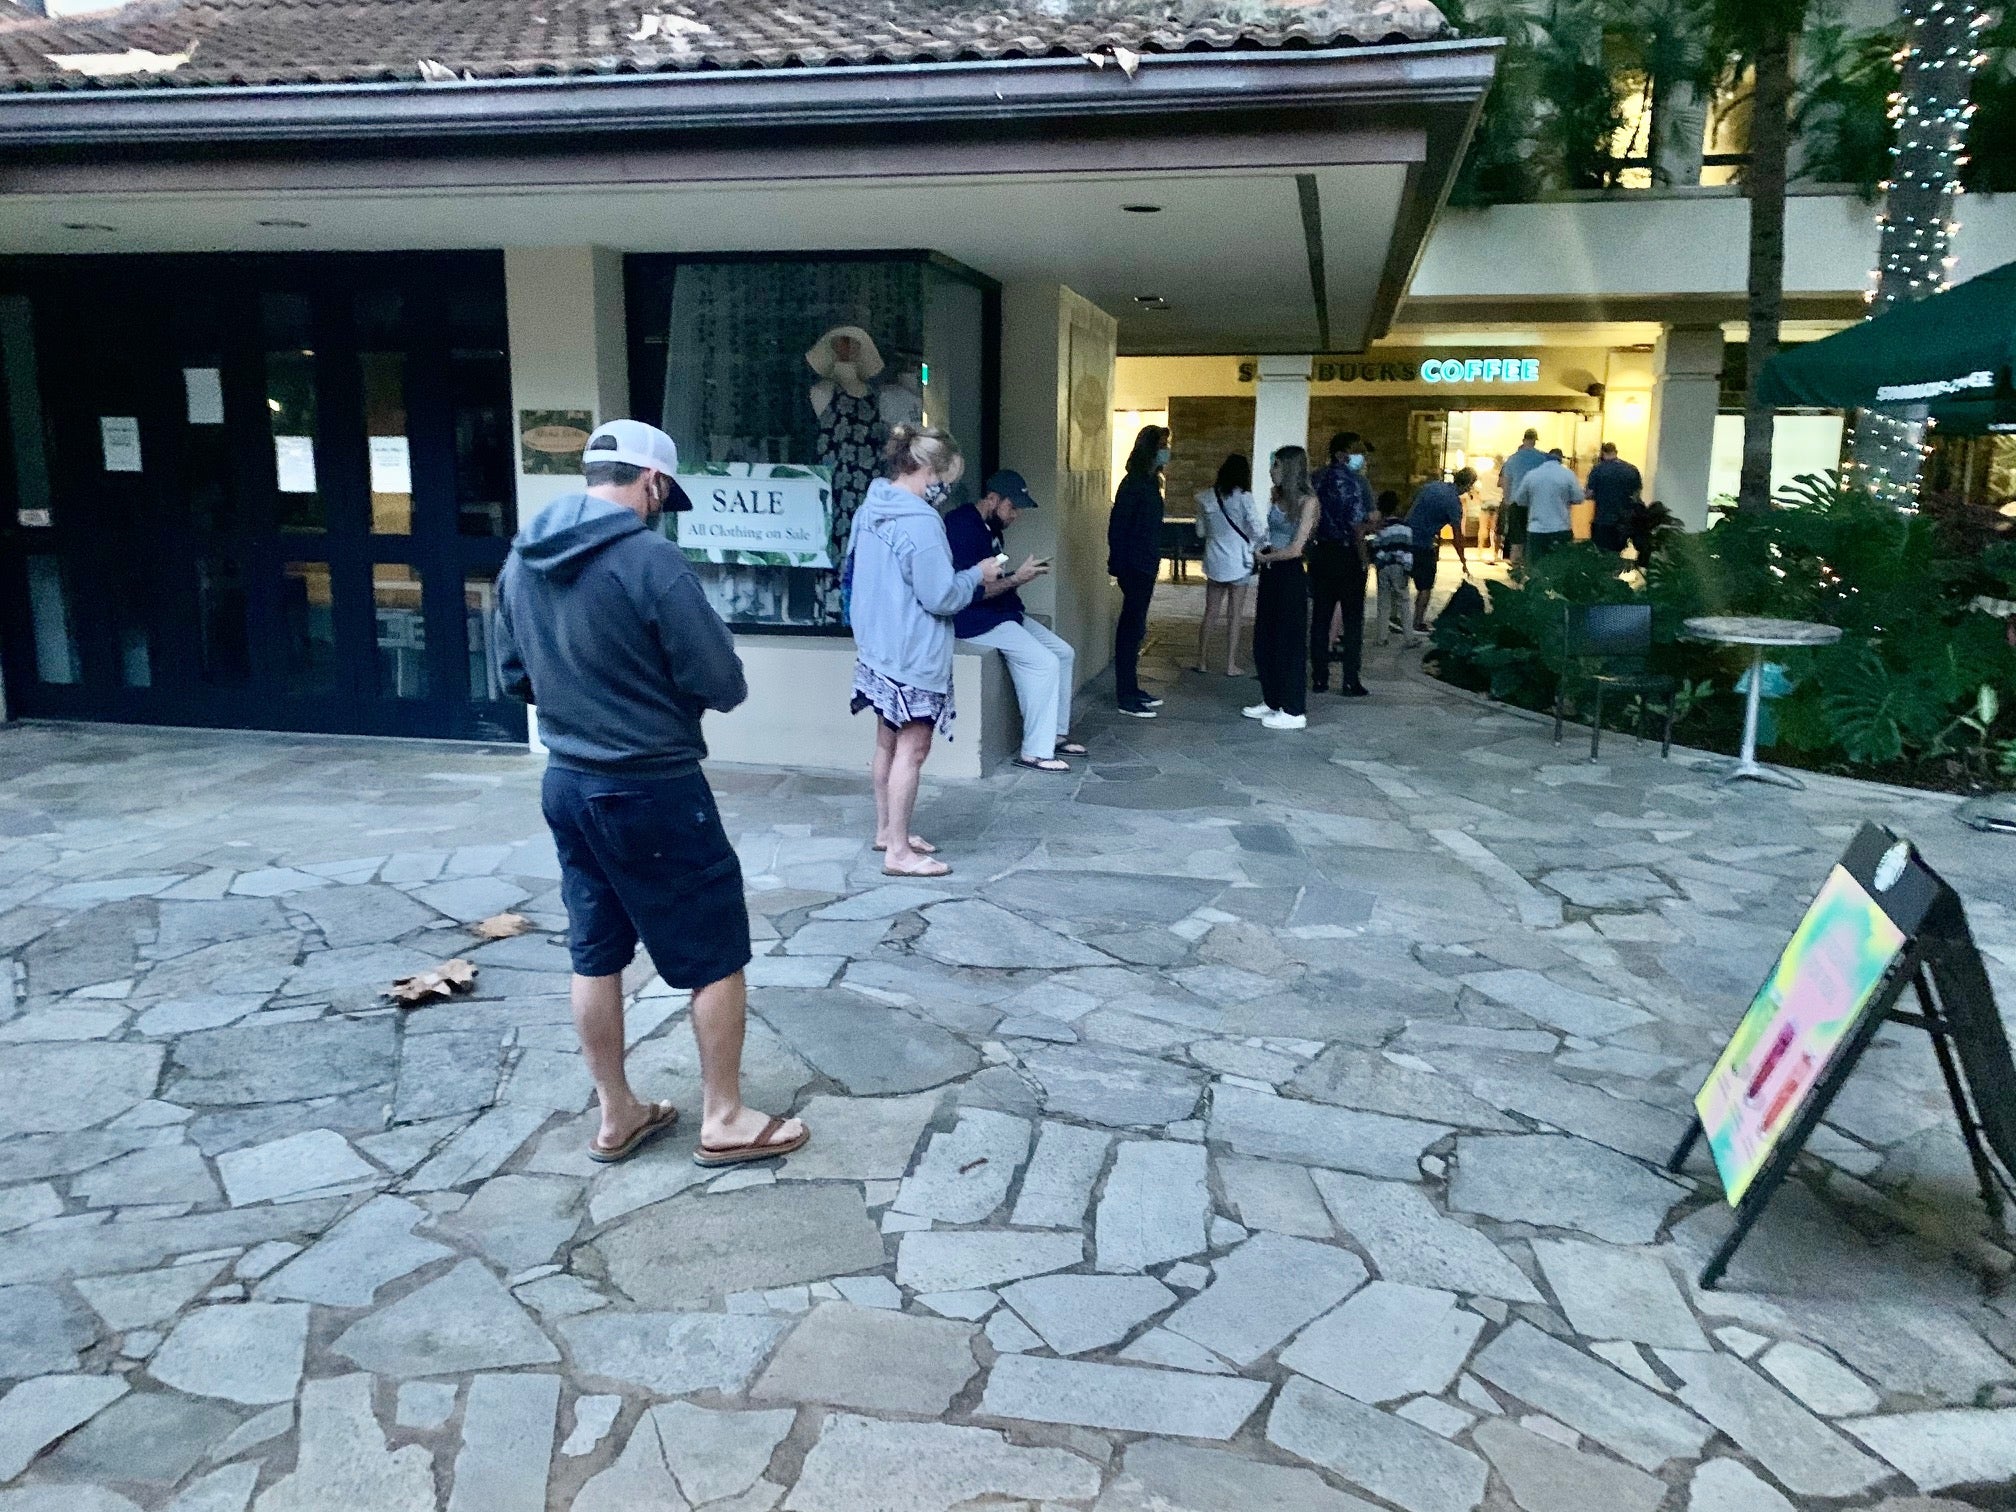 https://thepointsguy.global.ssl.fastly.net/us/originals/2021/04/Hilton-Waikiki-line-for-Starbucks-March-2021.-Photo-by-Clint-HendersonThe-Points-Guy-.jpg